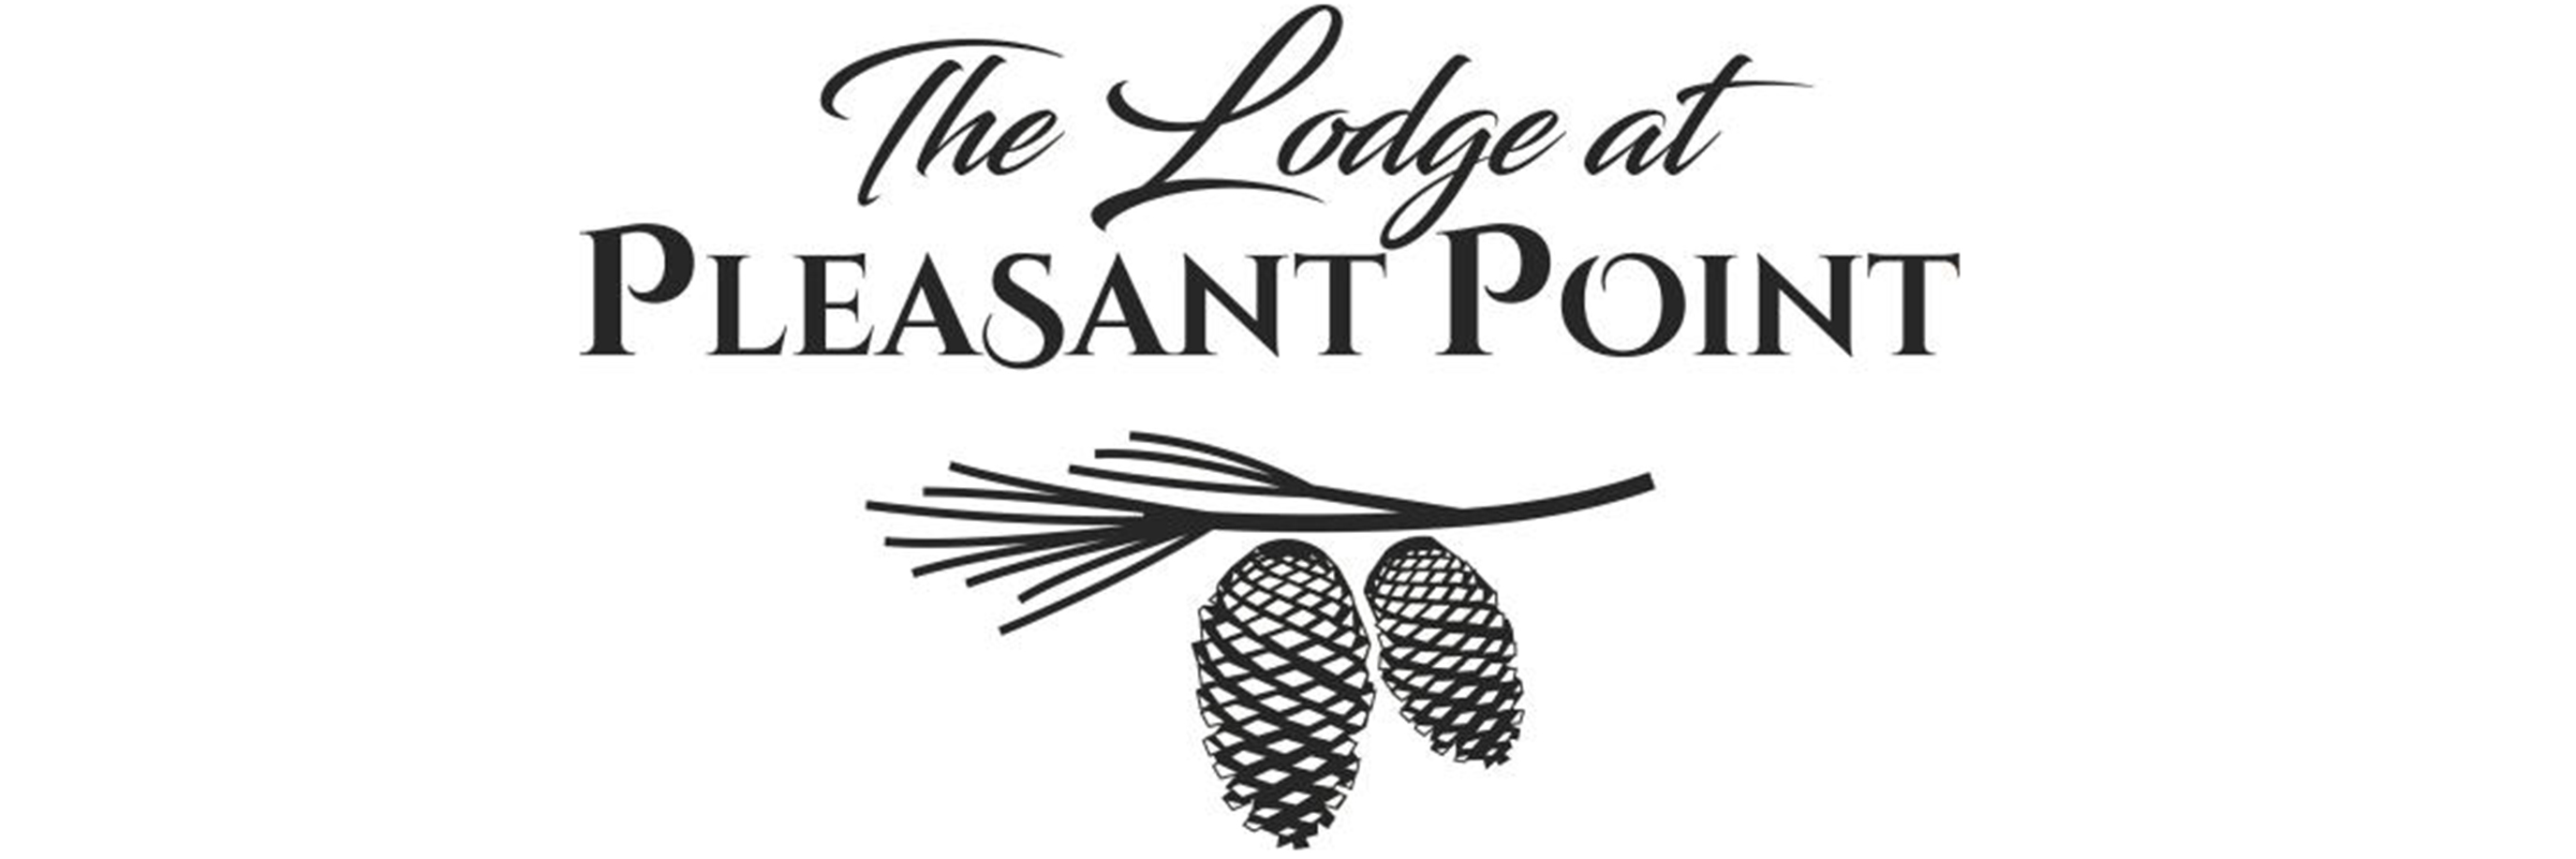 The Lodge at Pleasant Point